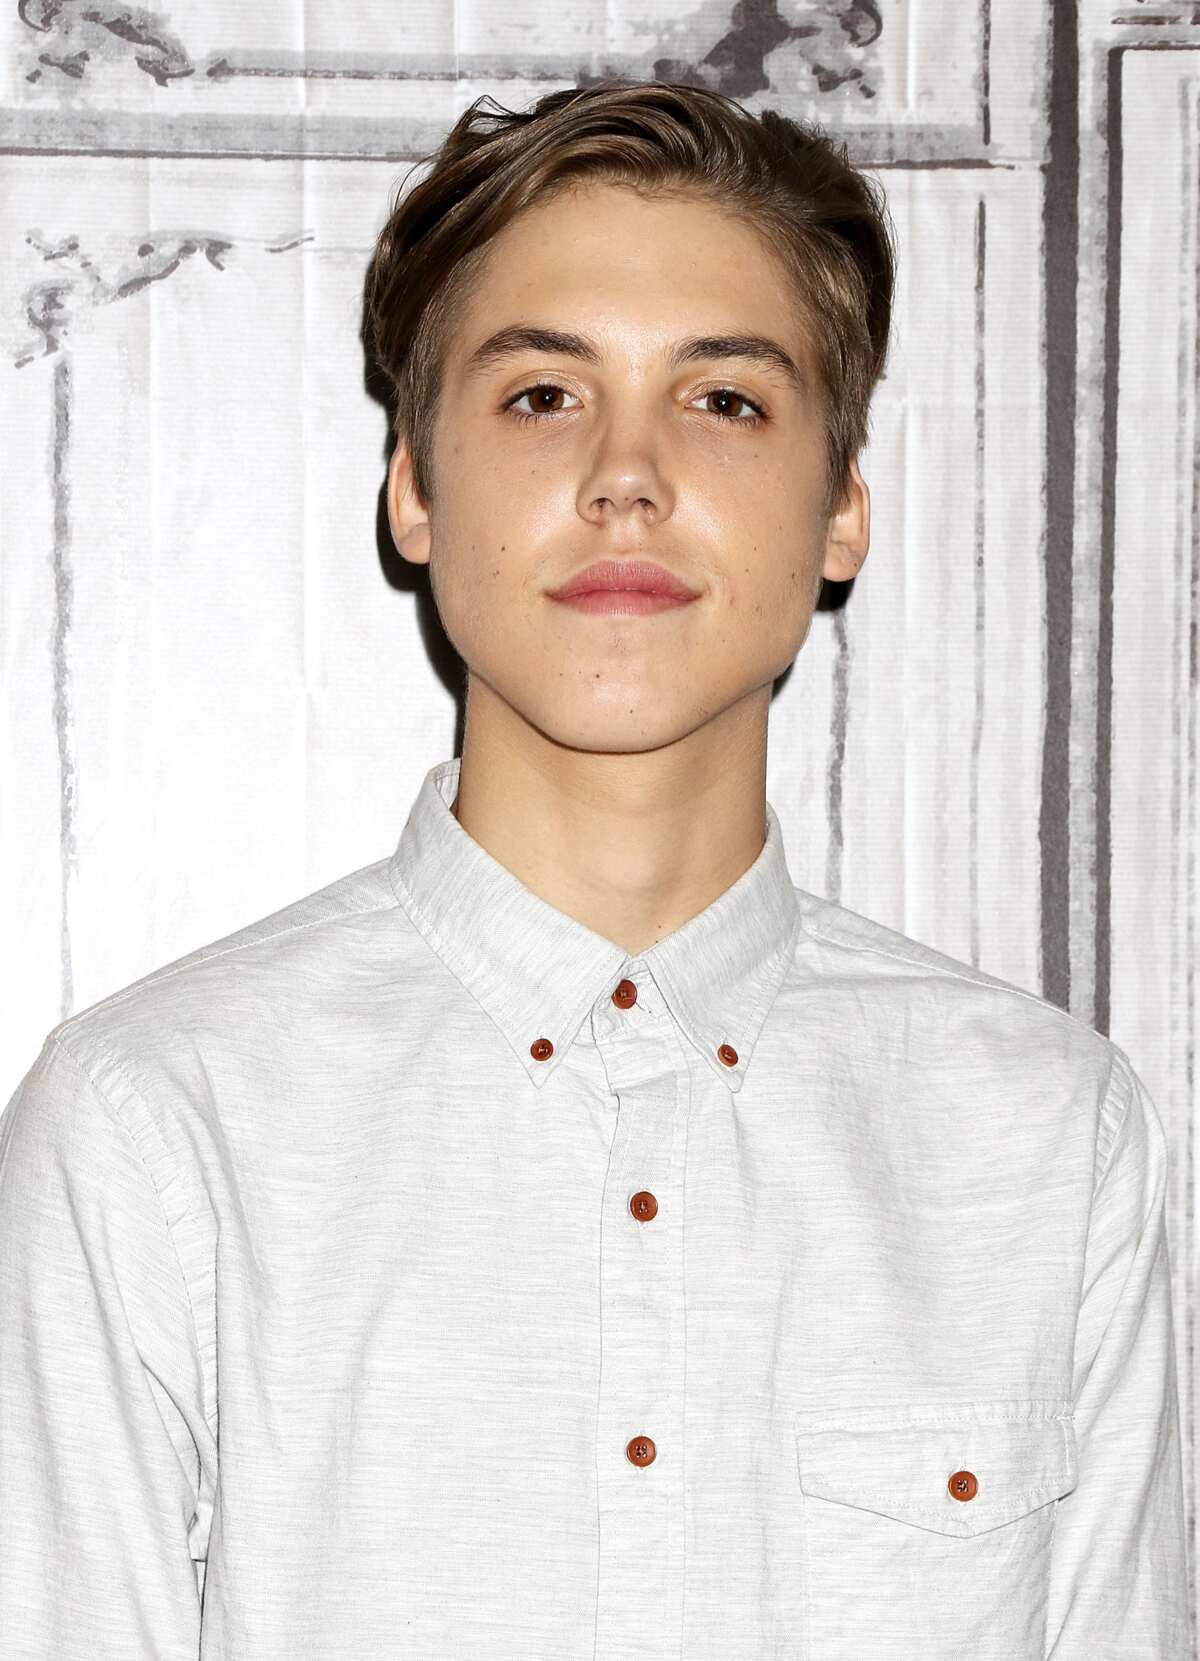 Matthew Espinosa’s biography: age, girlfriend, movies and TV shows